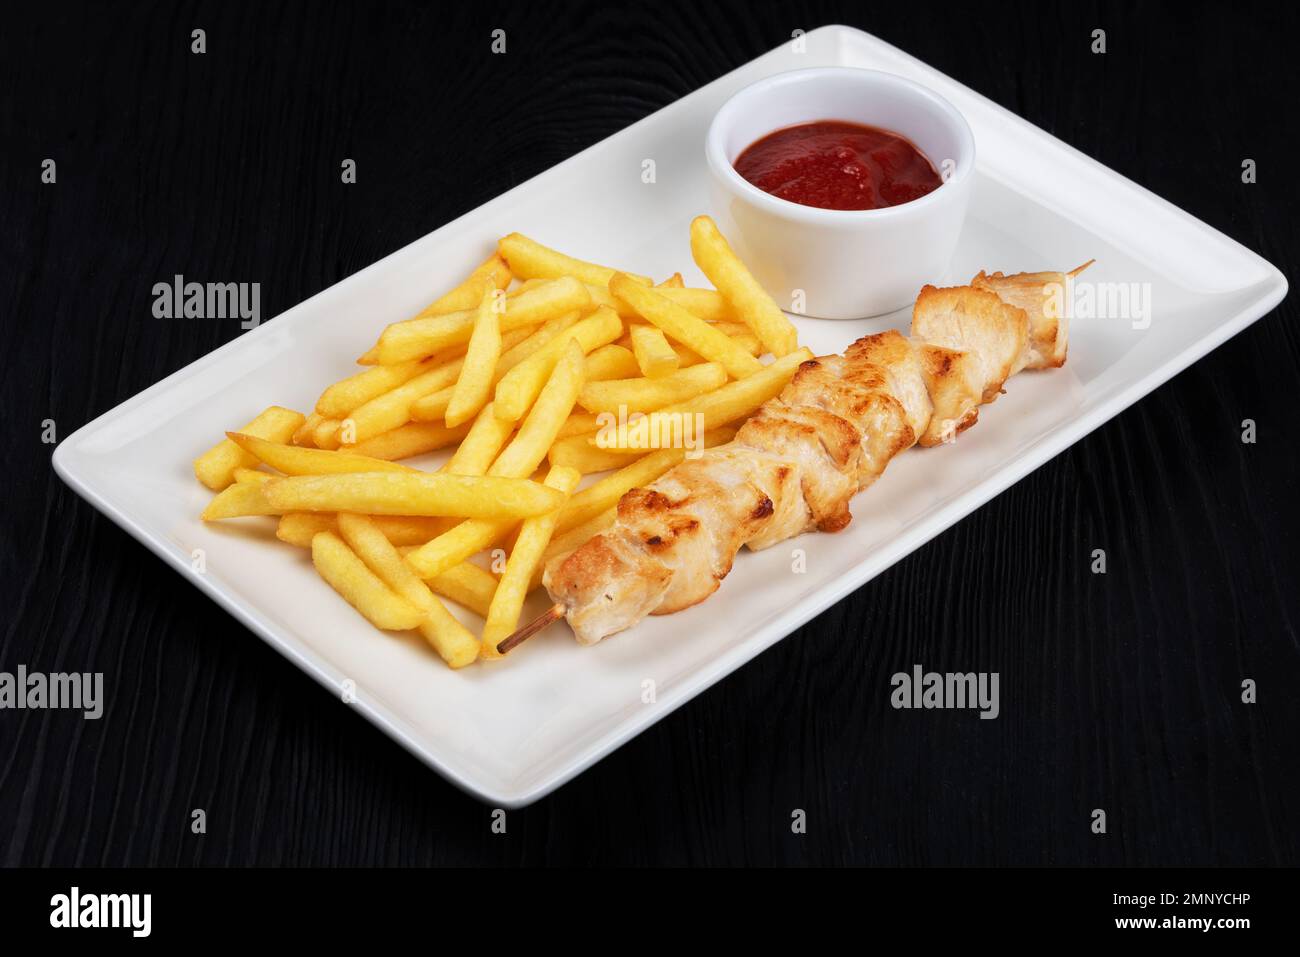 Grilled chicken shashlik meat with fried potatoes on white plate on black wooden background Stock Photo